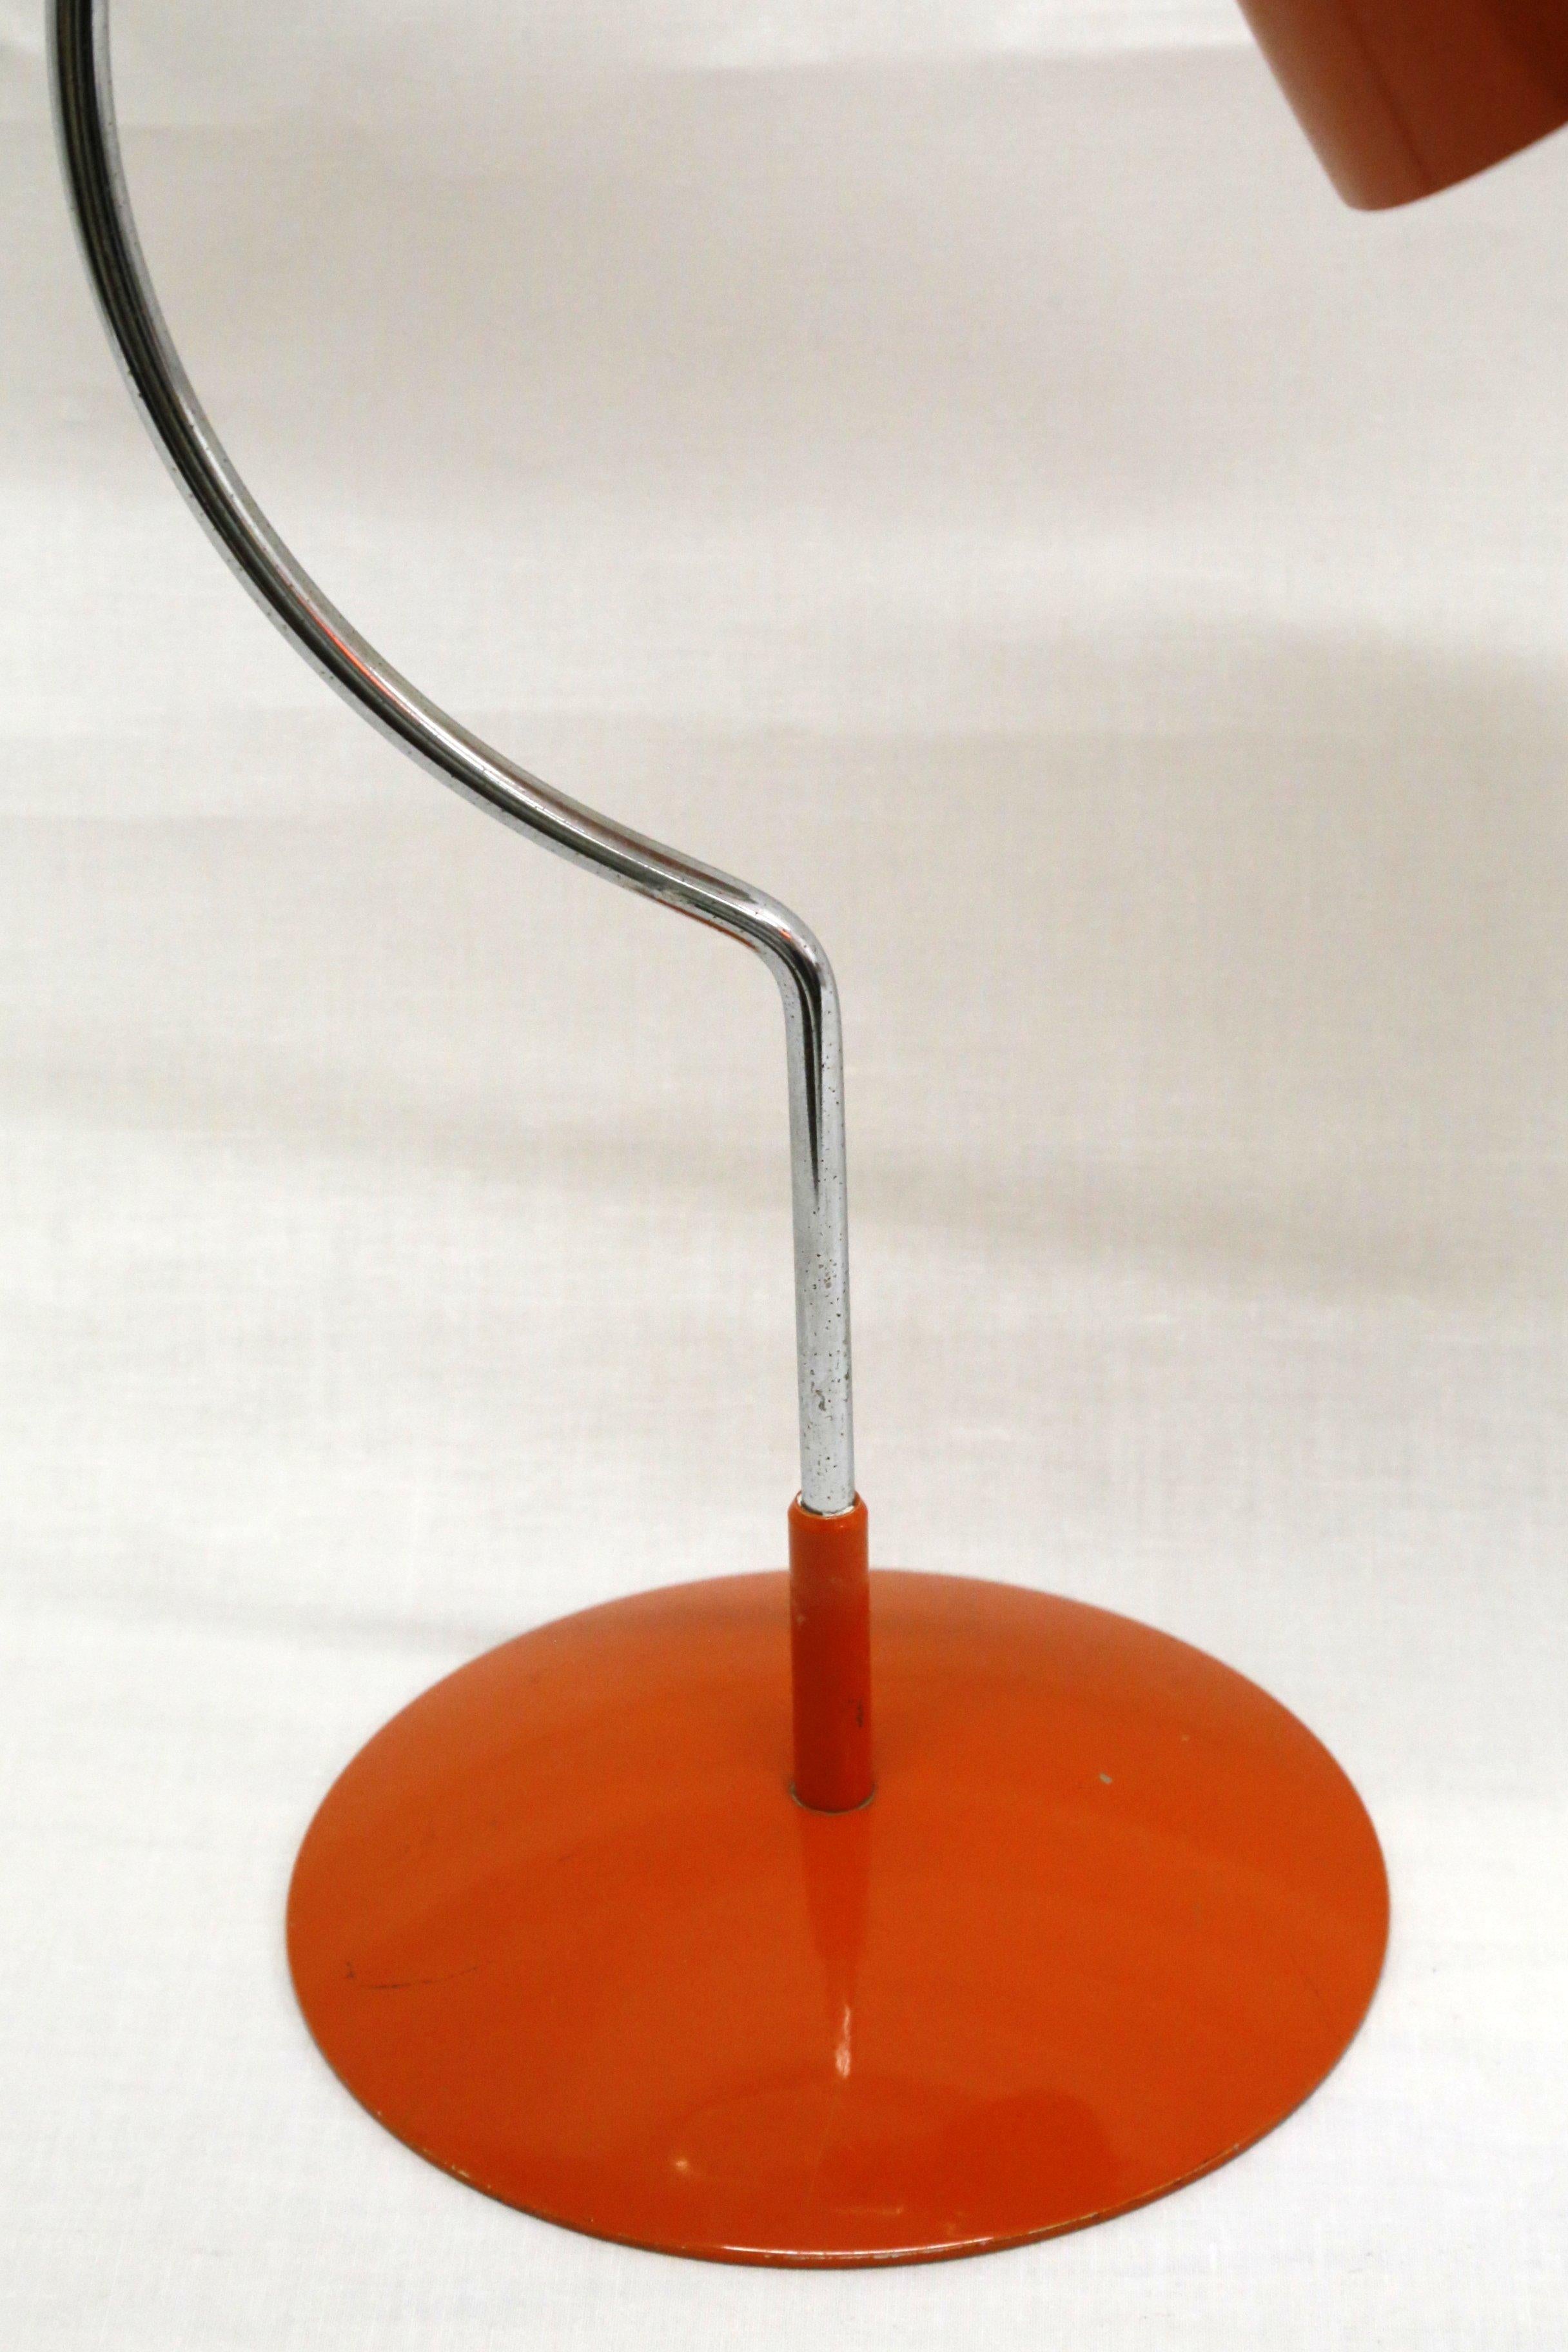 Aluminum Space Age Table Lamp, Chrome-Plated and Orange Color, by Josef Hurka, 1960s